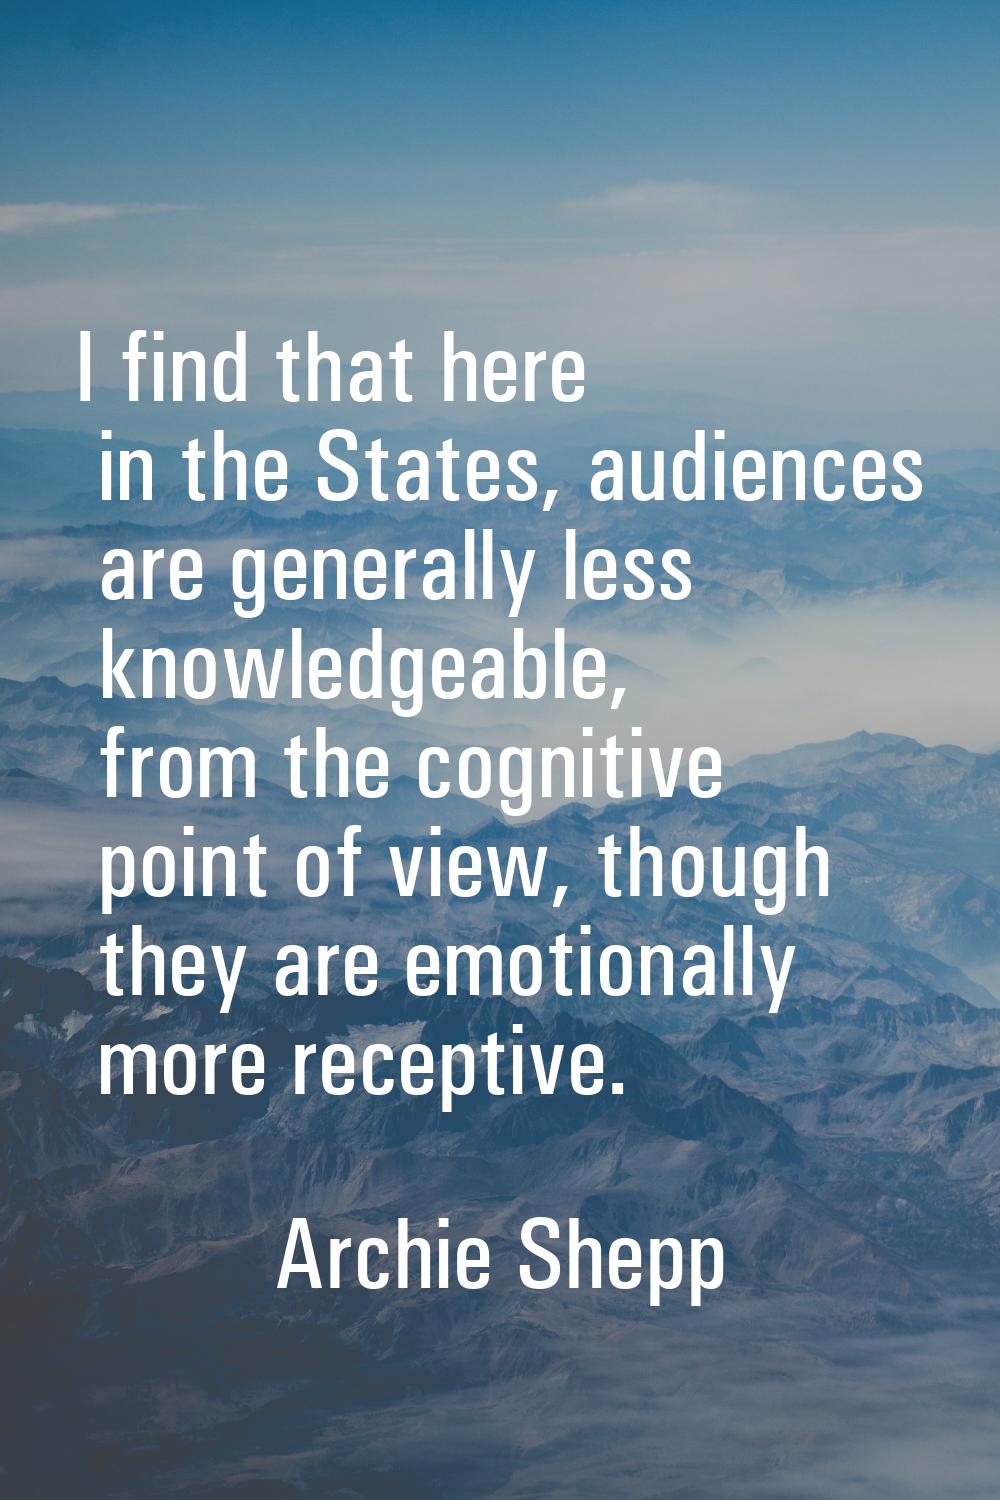 I find that here in the States, audiences are generally less knowledgeable, from the cognitive poin